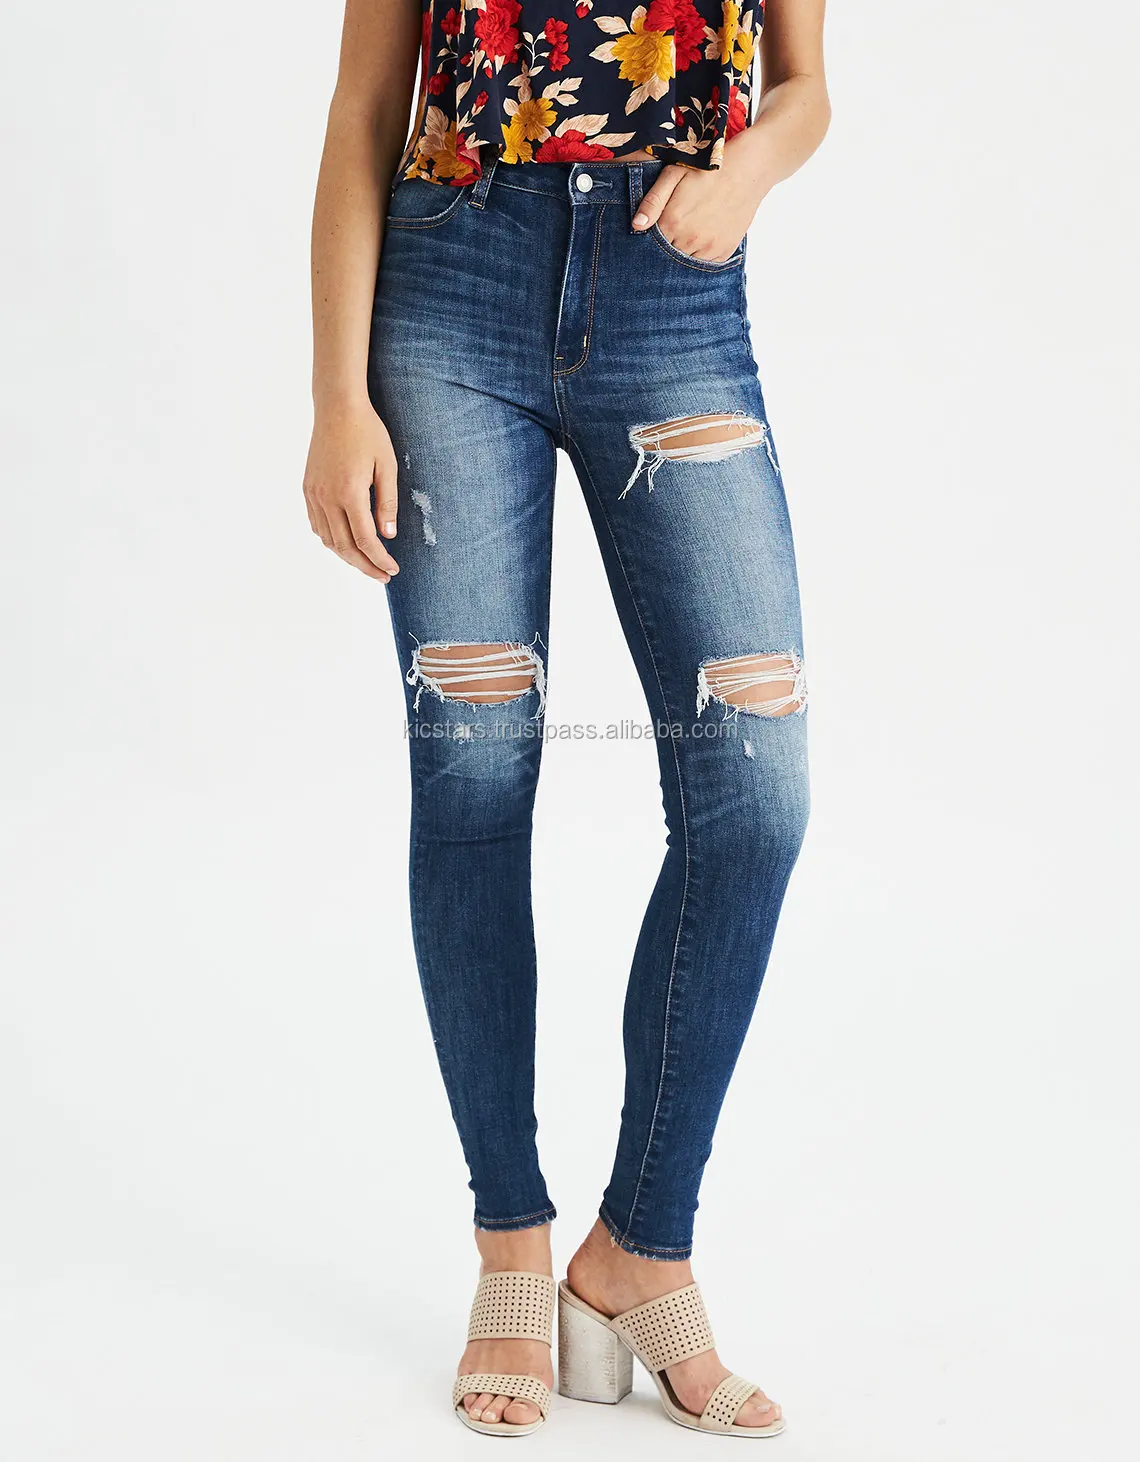 latest girl jeans style